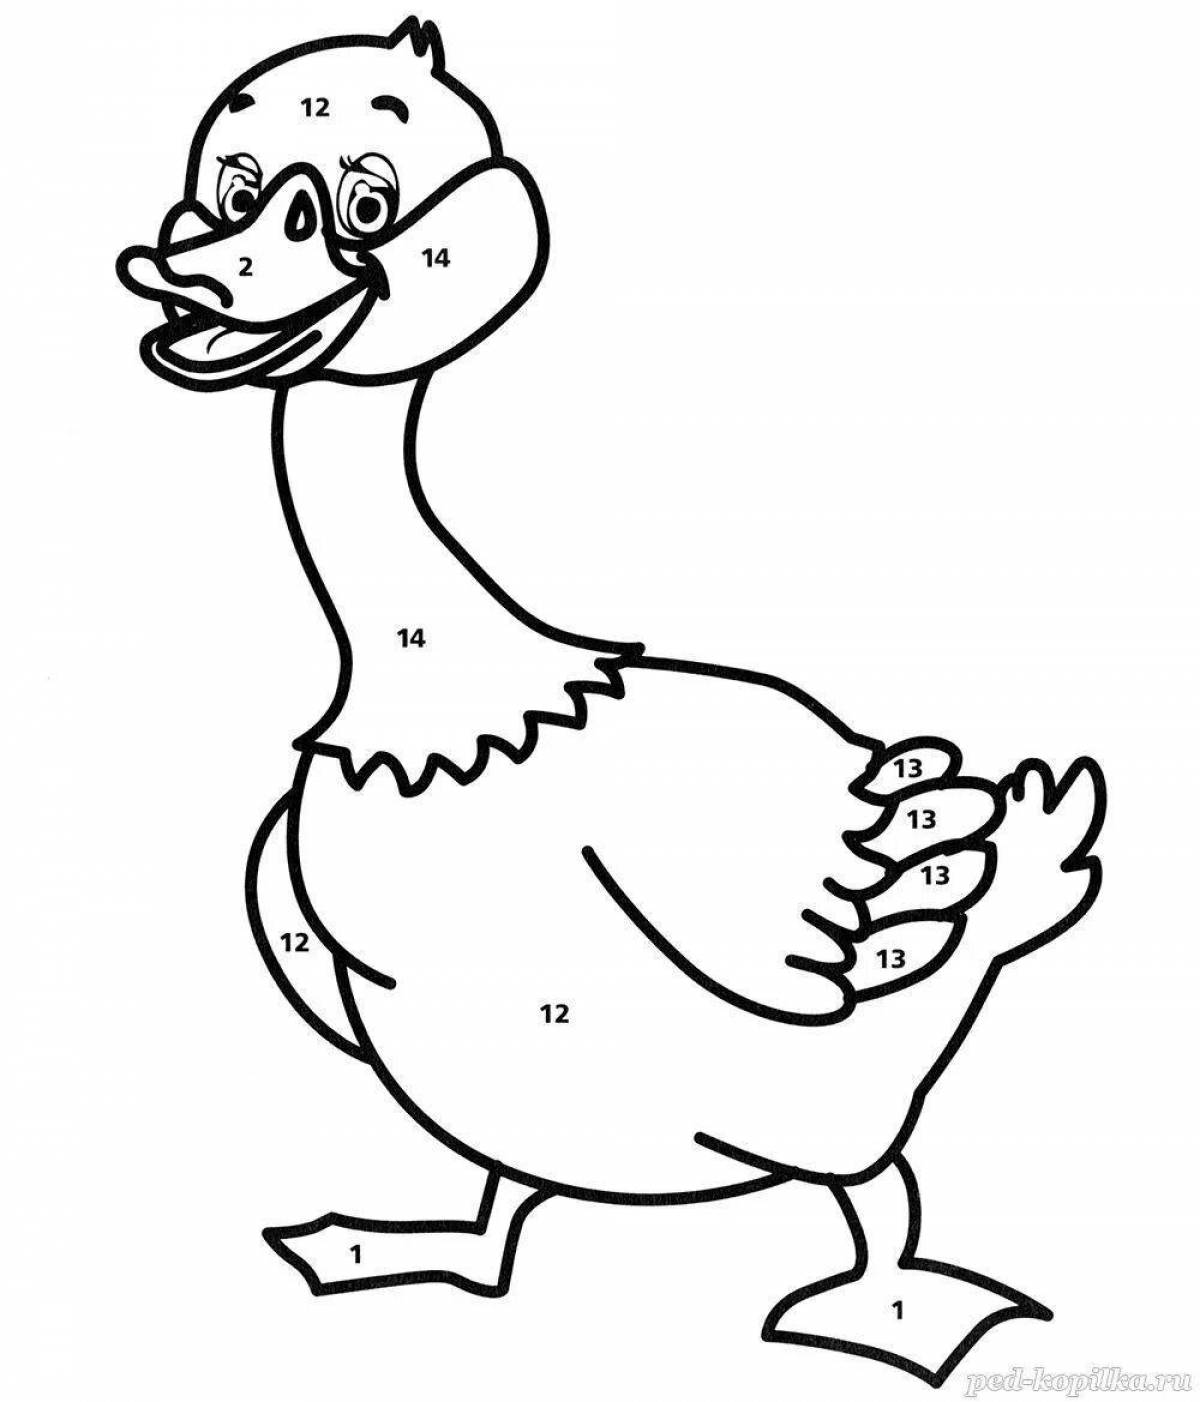 Adorable goose coloring book for 3-4 year olds